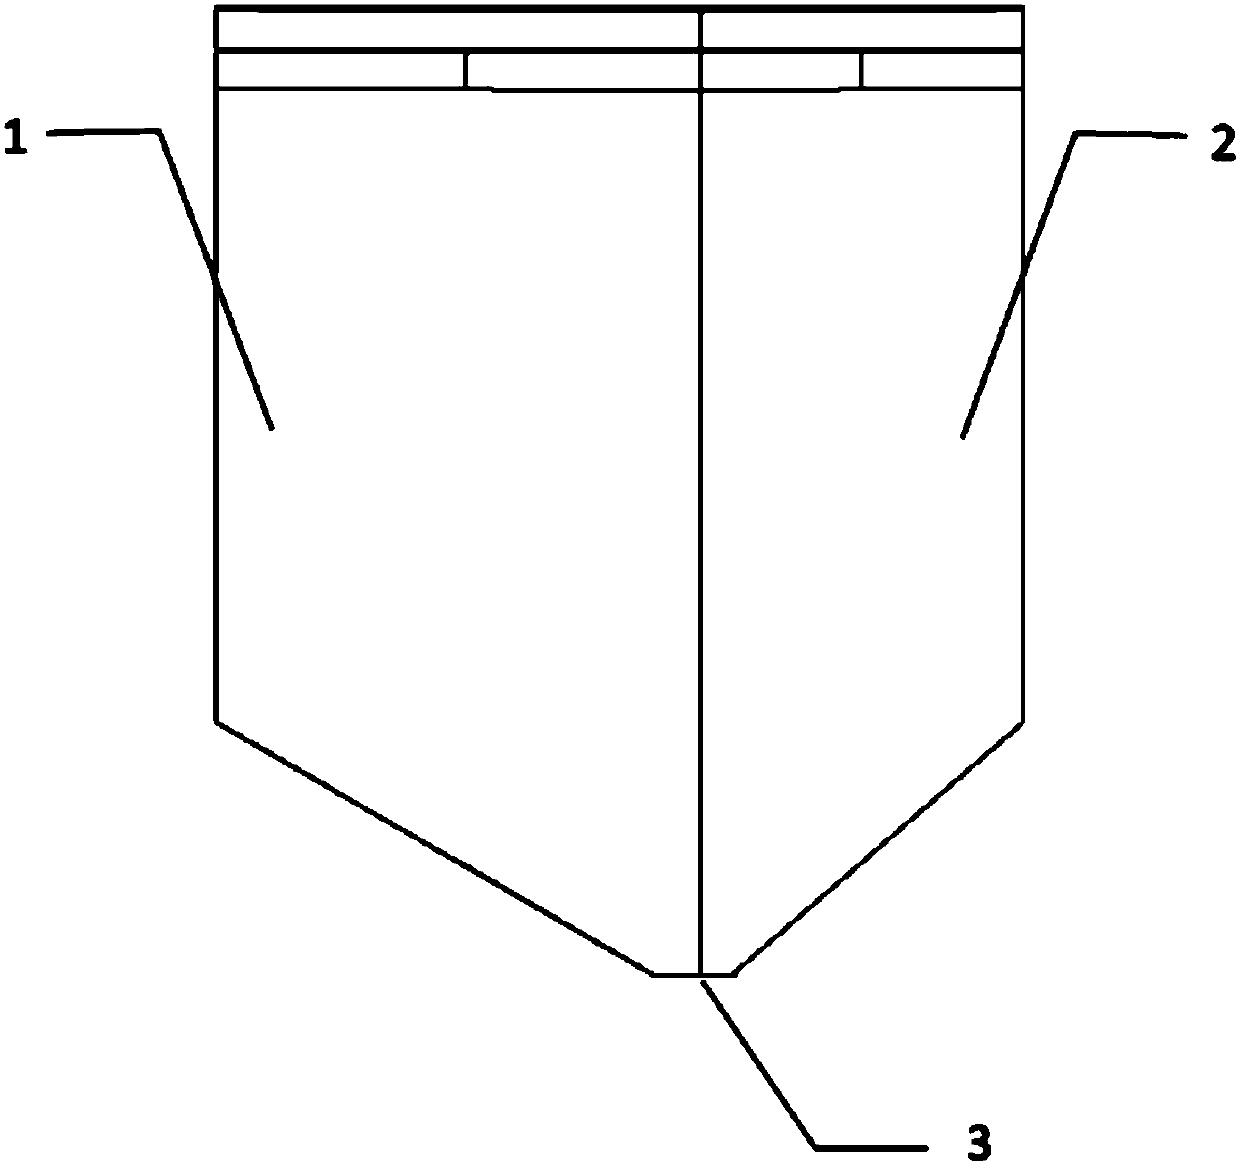 Flow-dividing noise-reduction hook face structure used for multi-wing centrifugal fan